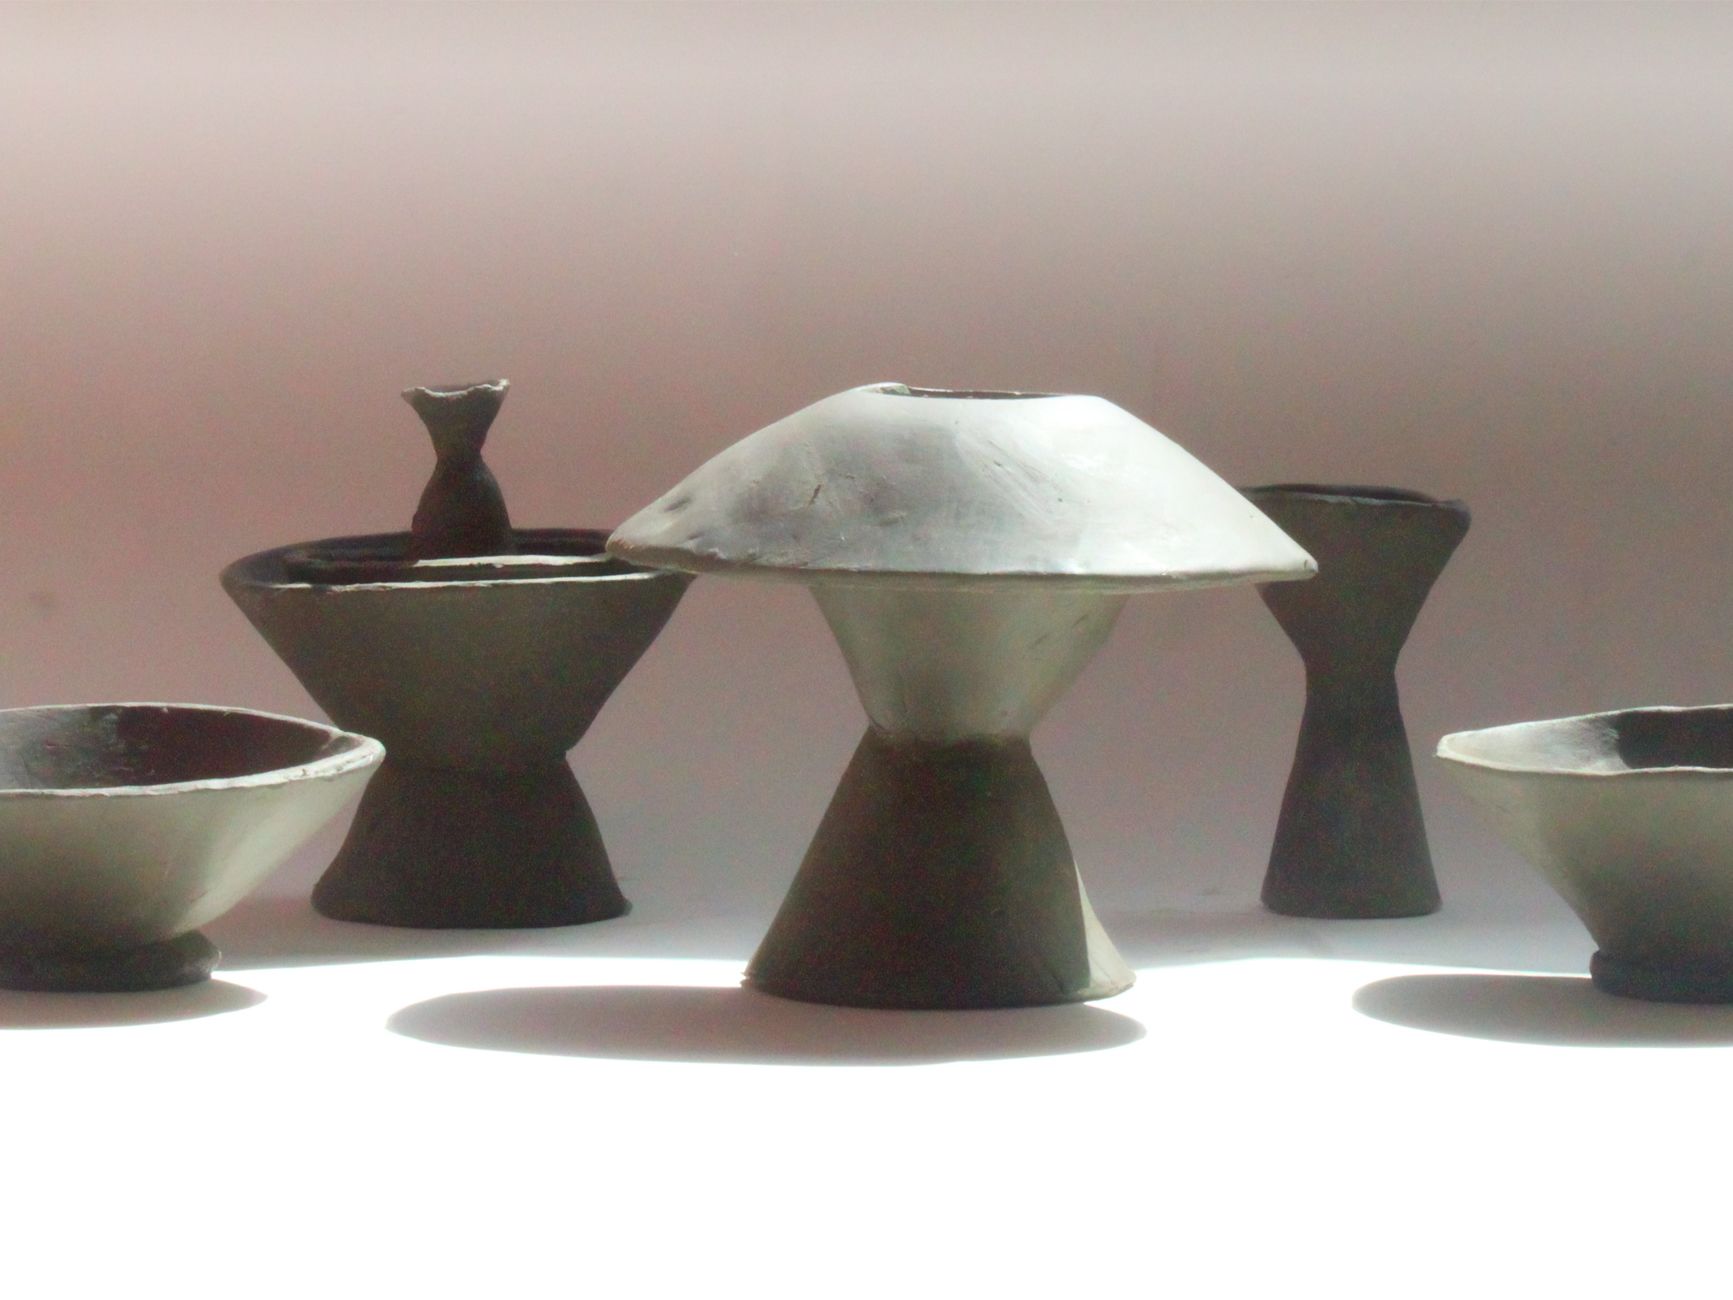 photograph of conical clay vases, jugs and vessels in different sizes or forms